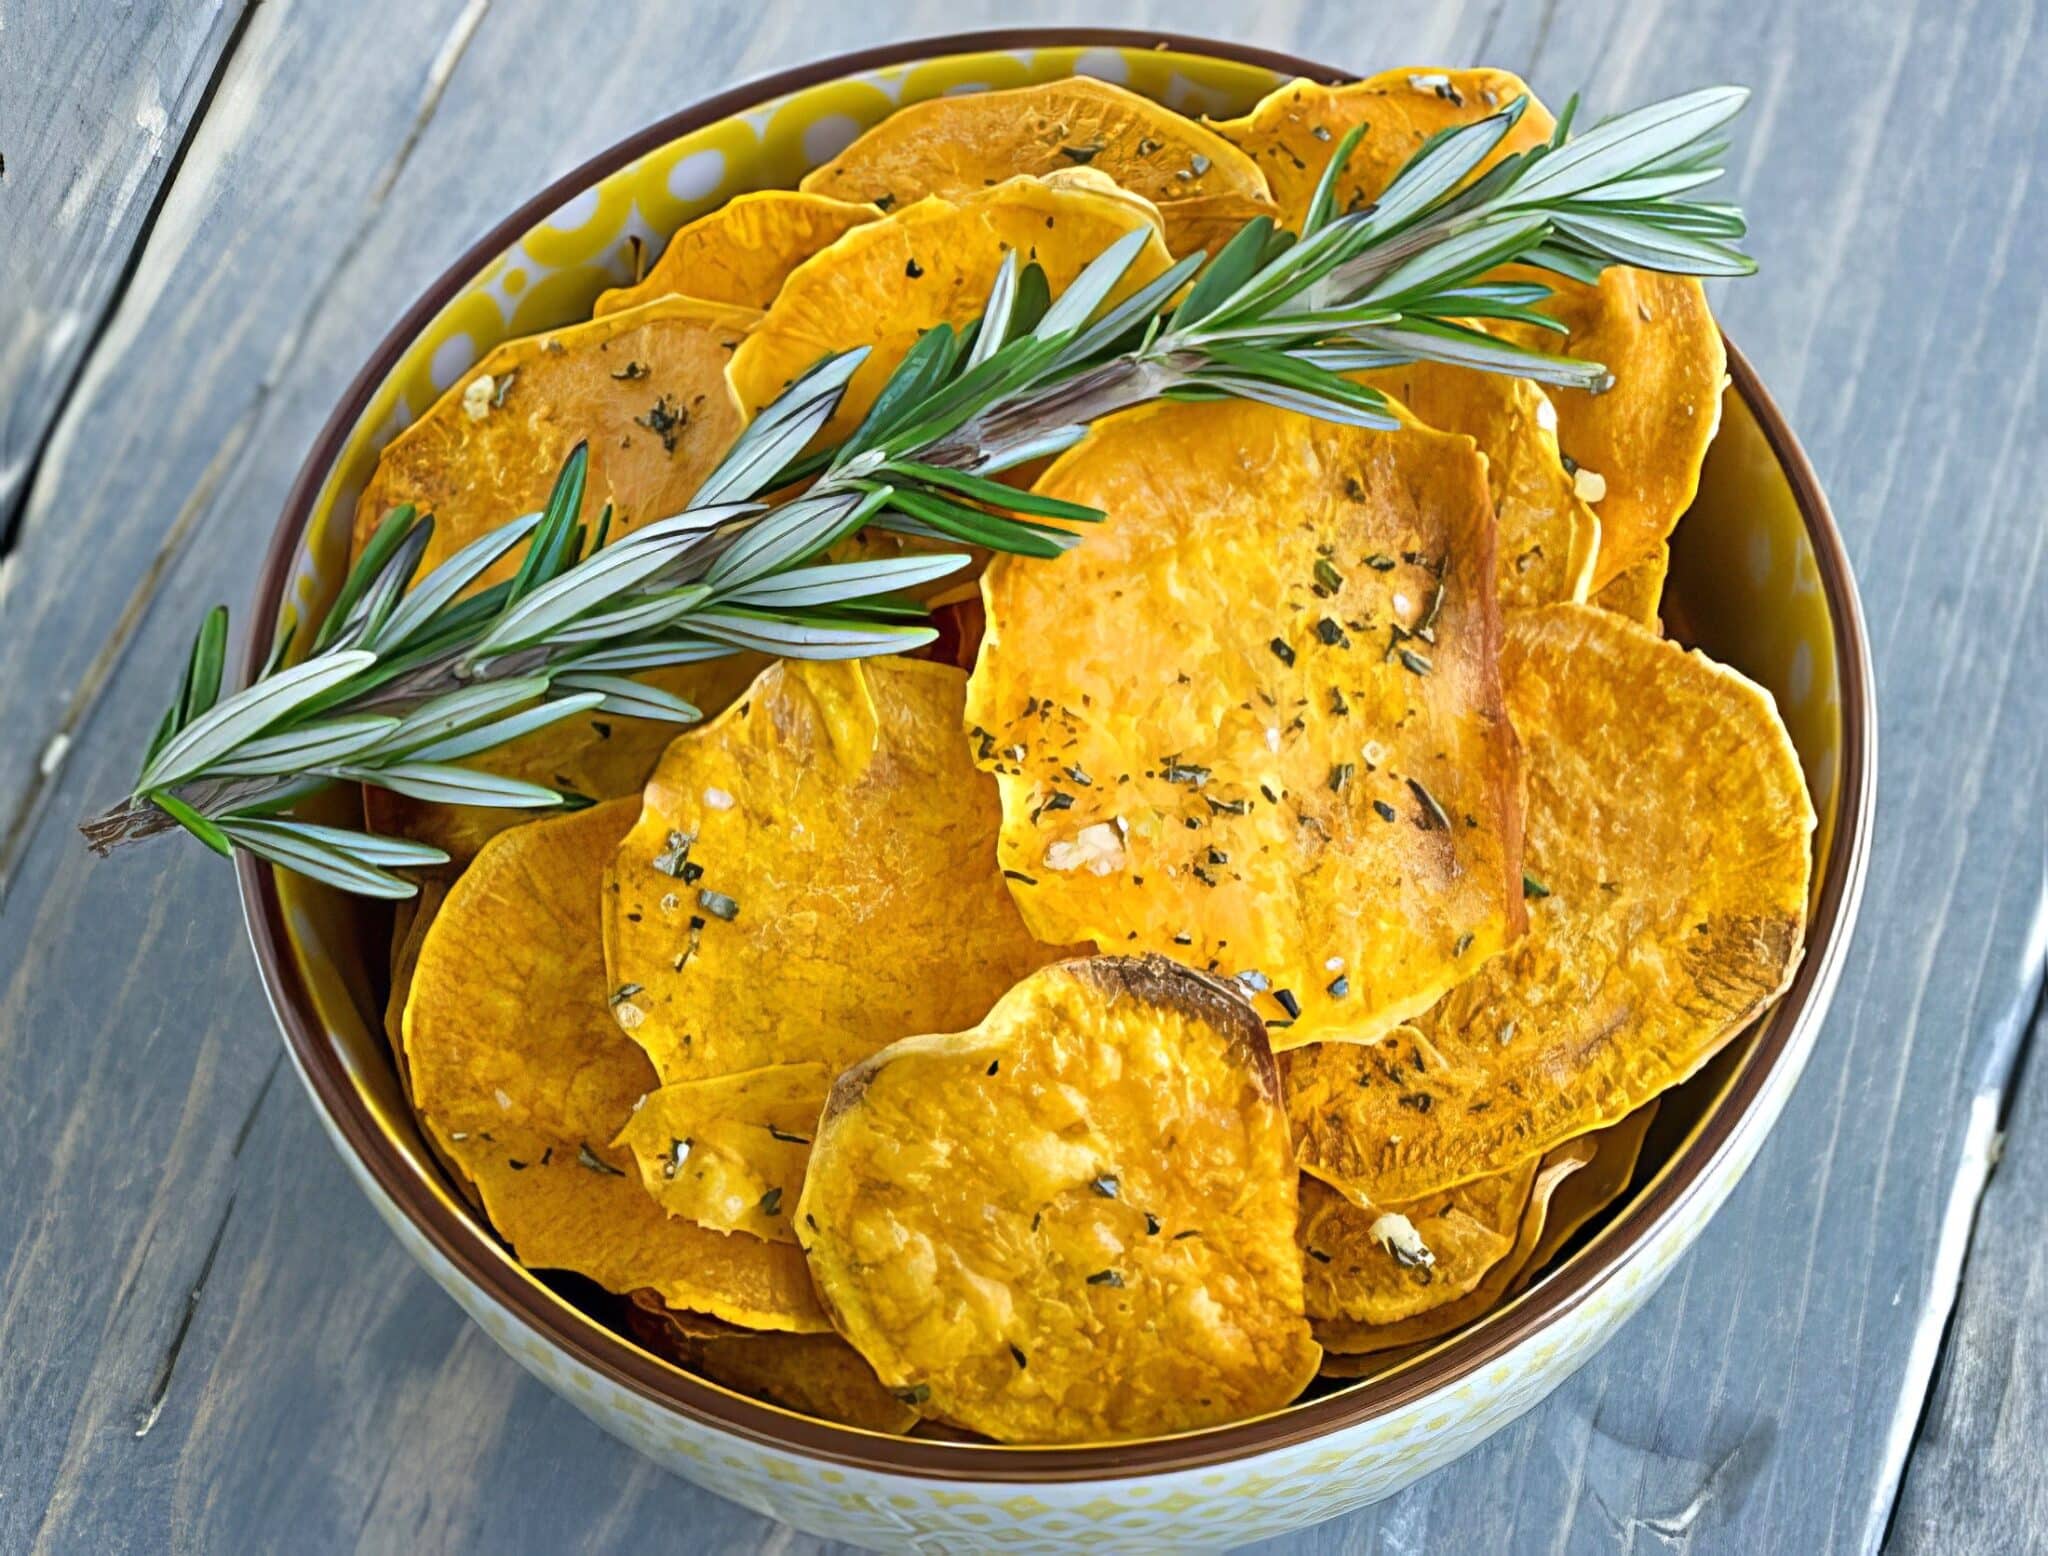 homemade baked sweet potato chips with garlic and rosemary